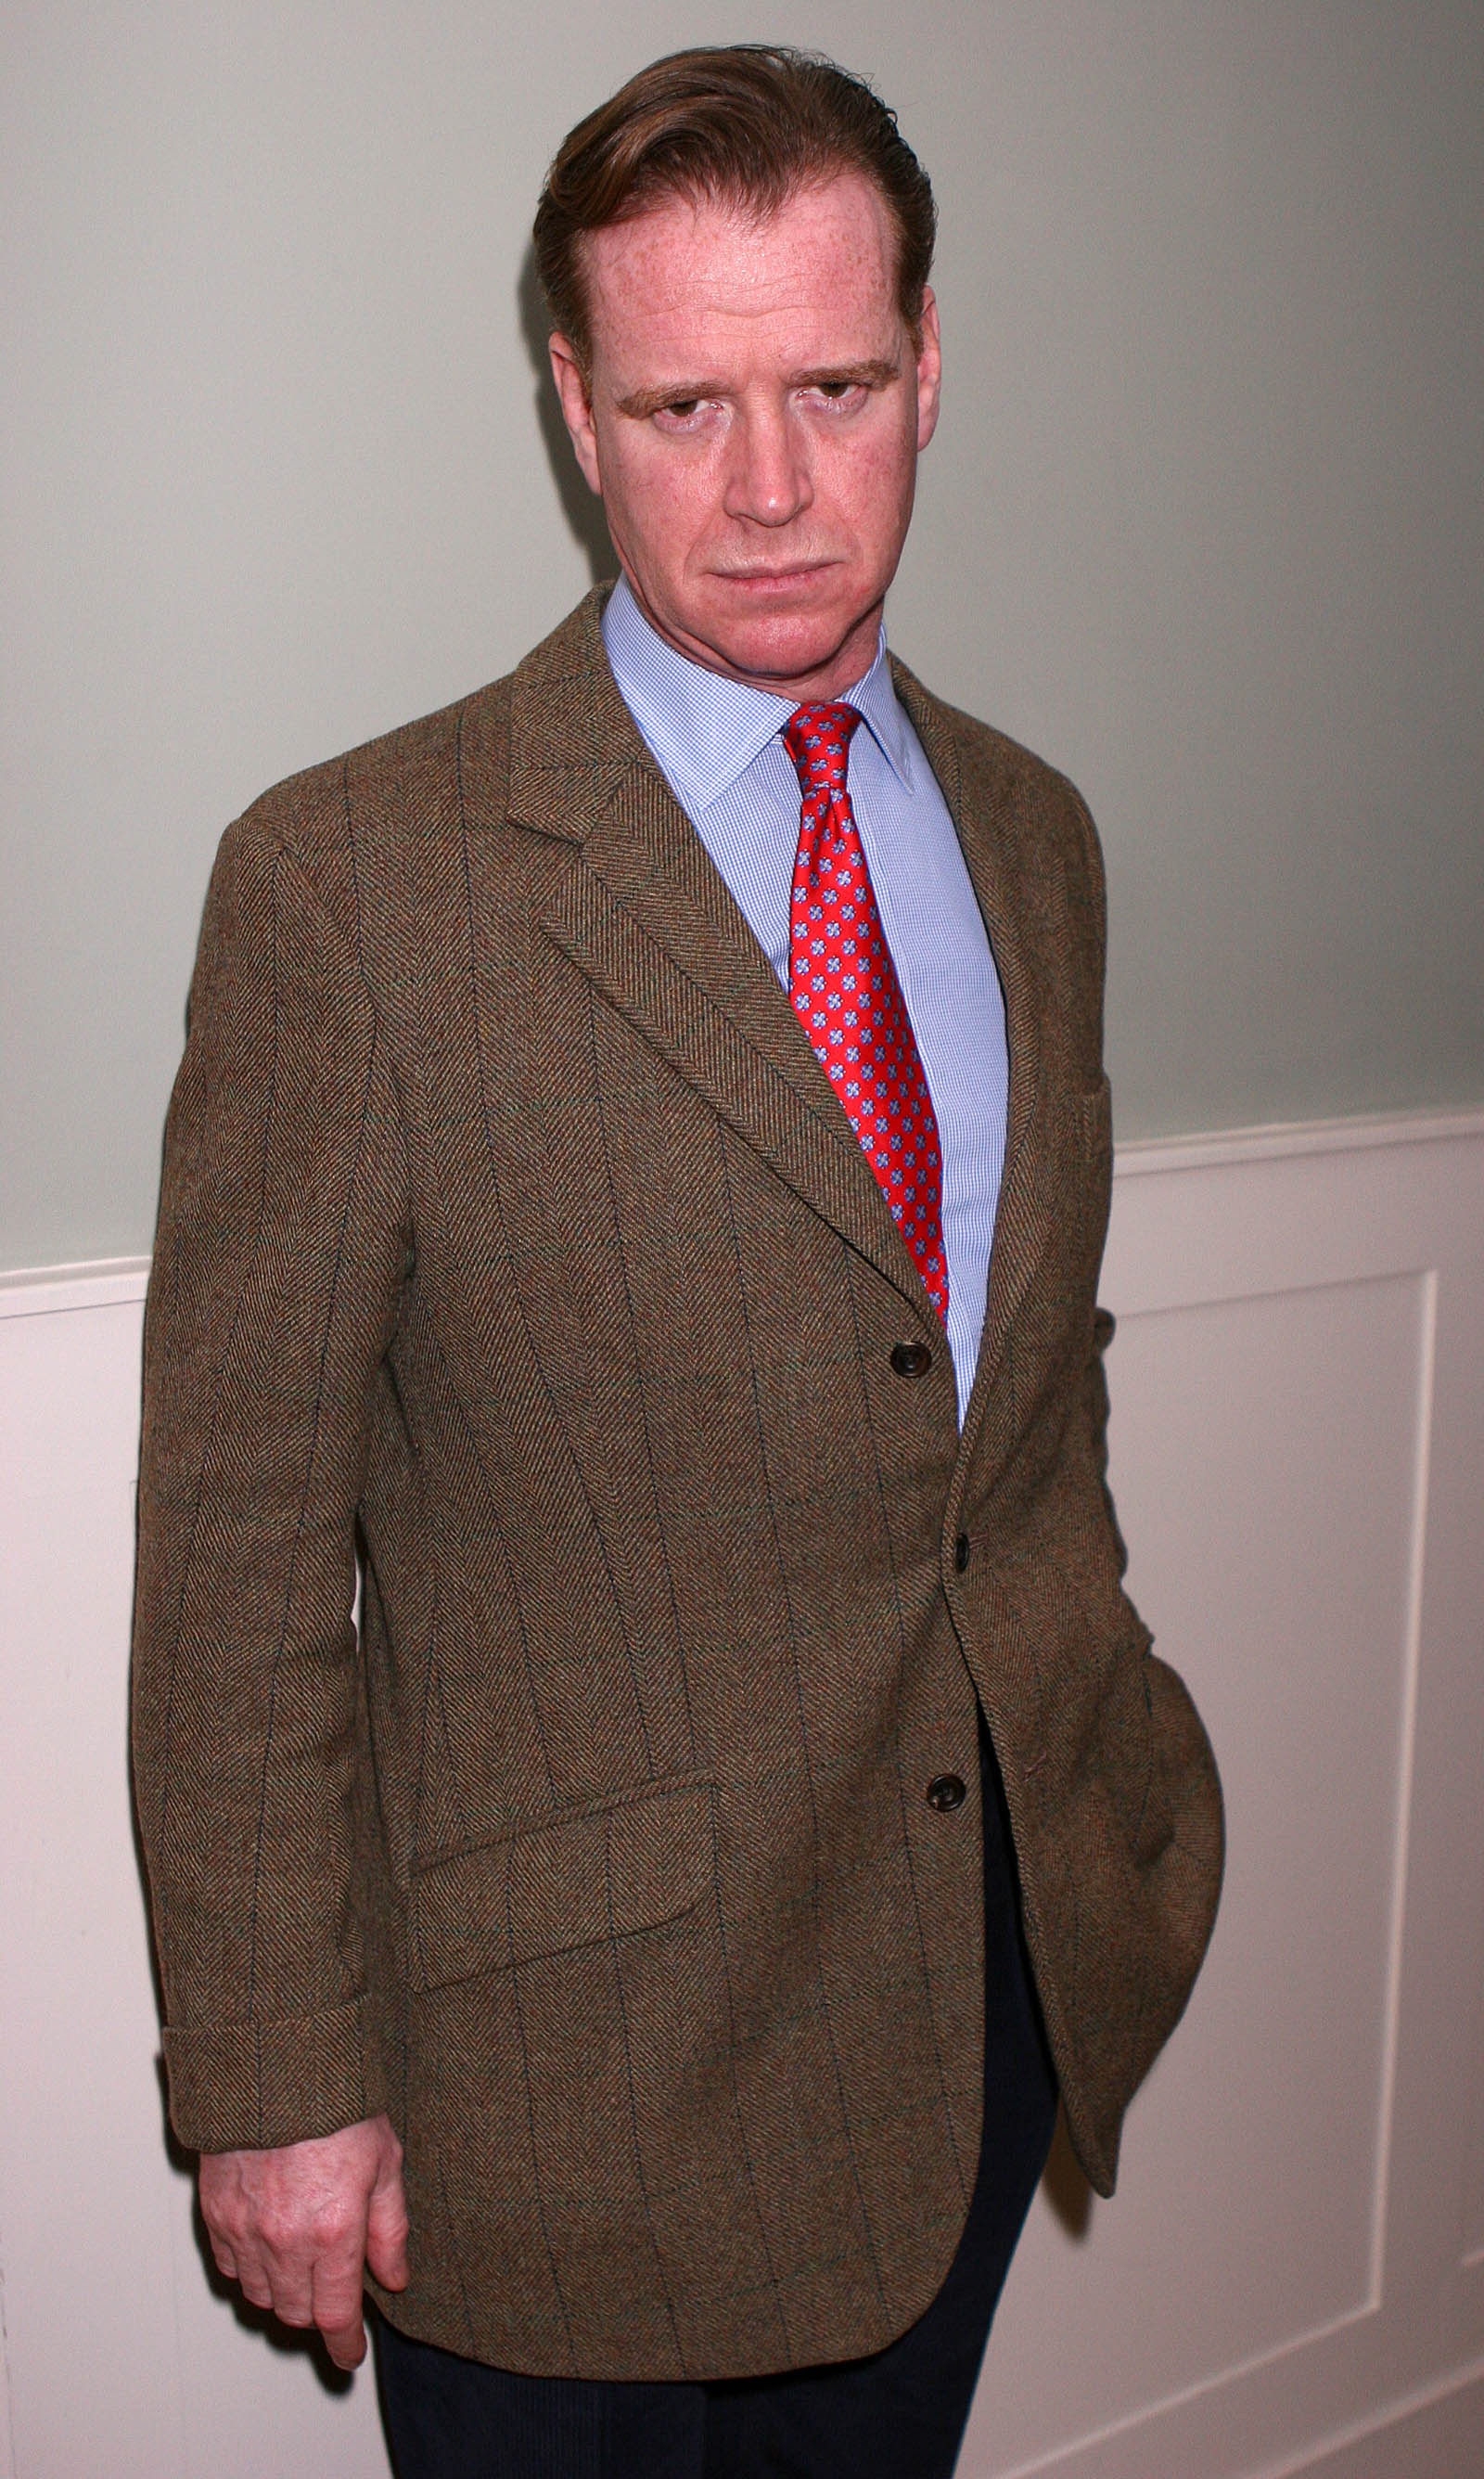 James Hewitt at the celebrity opening of the George Bar and restaurant on January 12, 2006 | Source: Getty Images